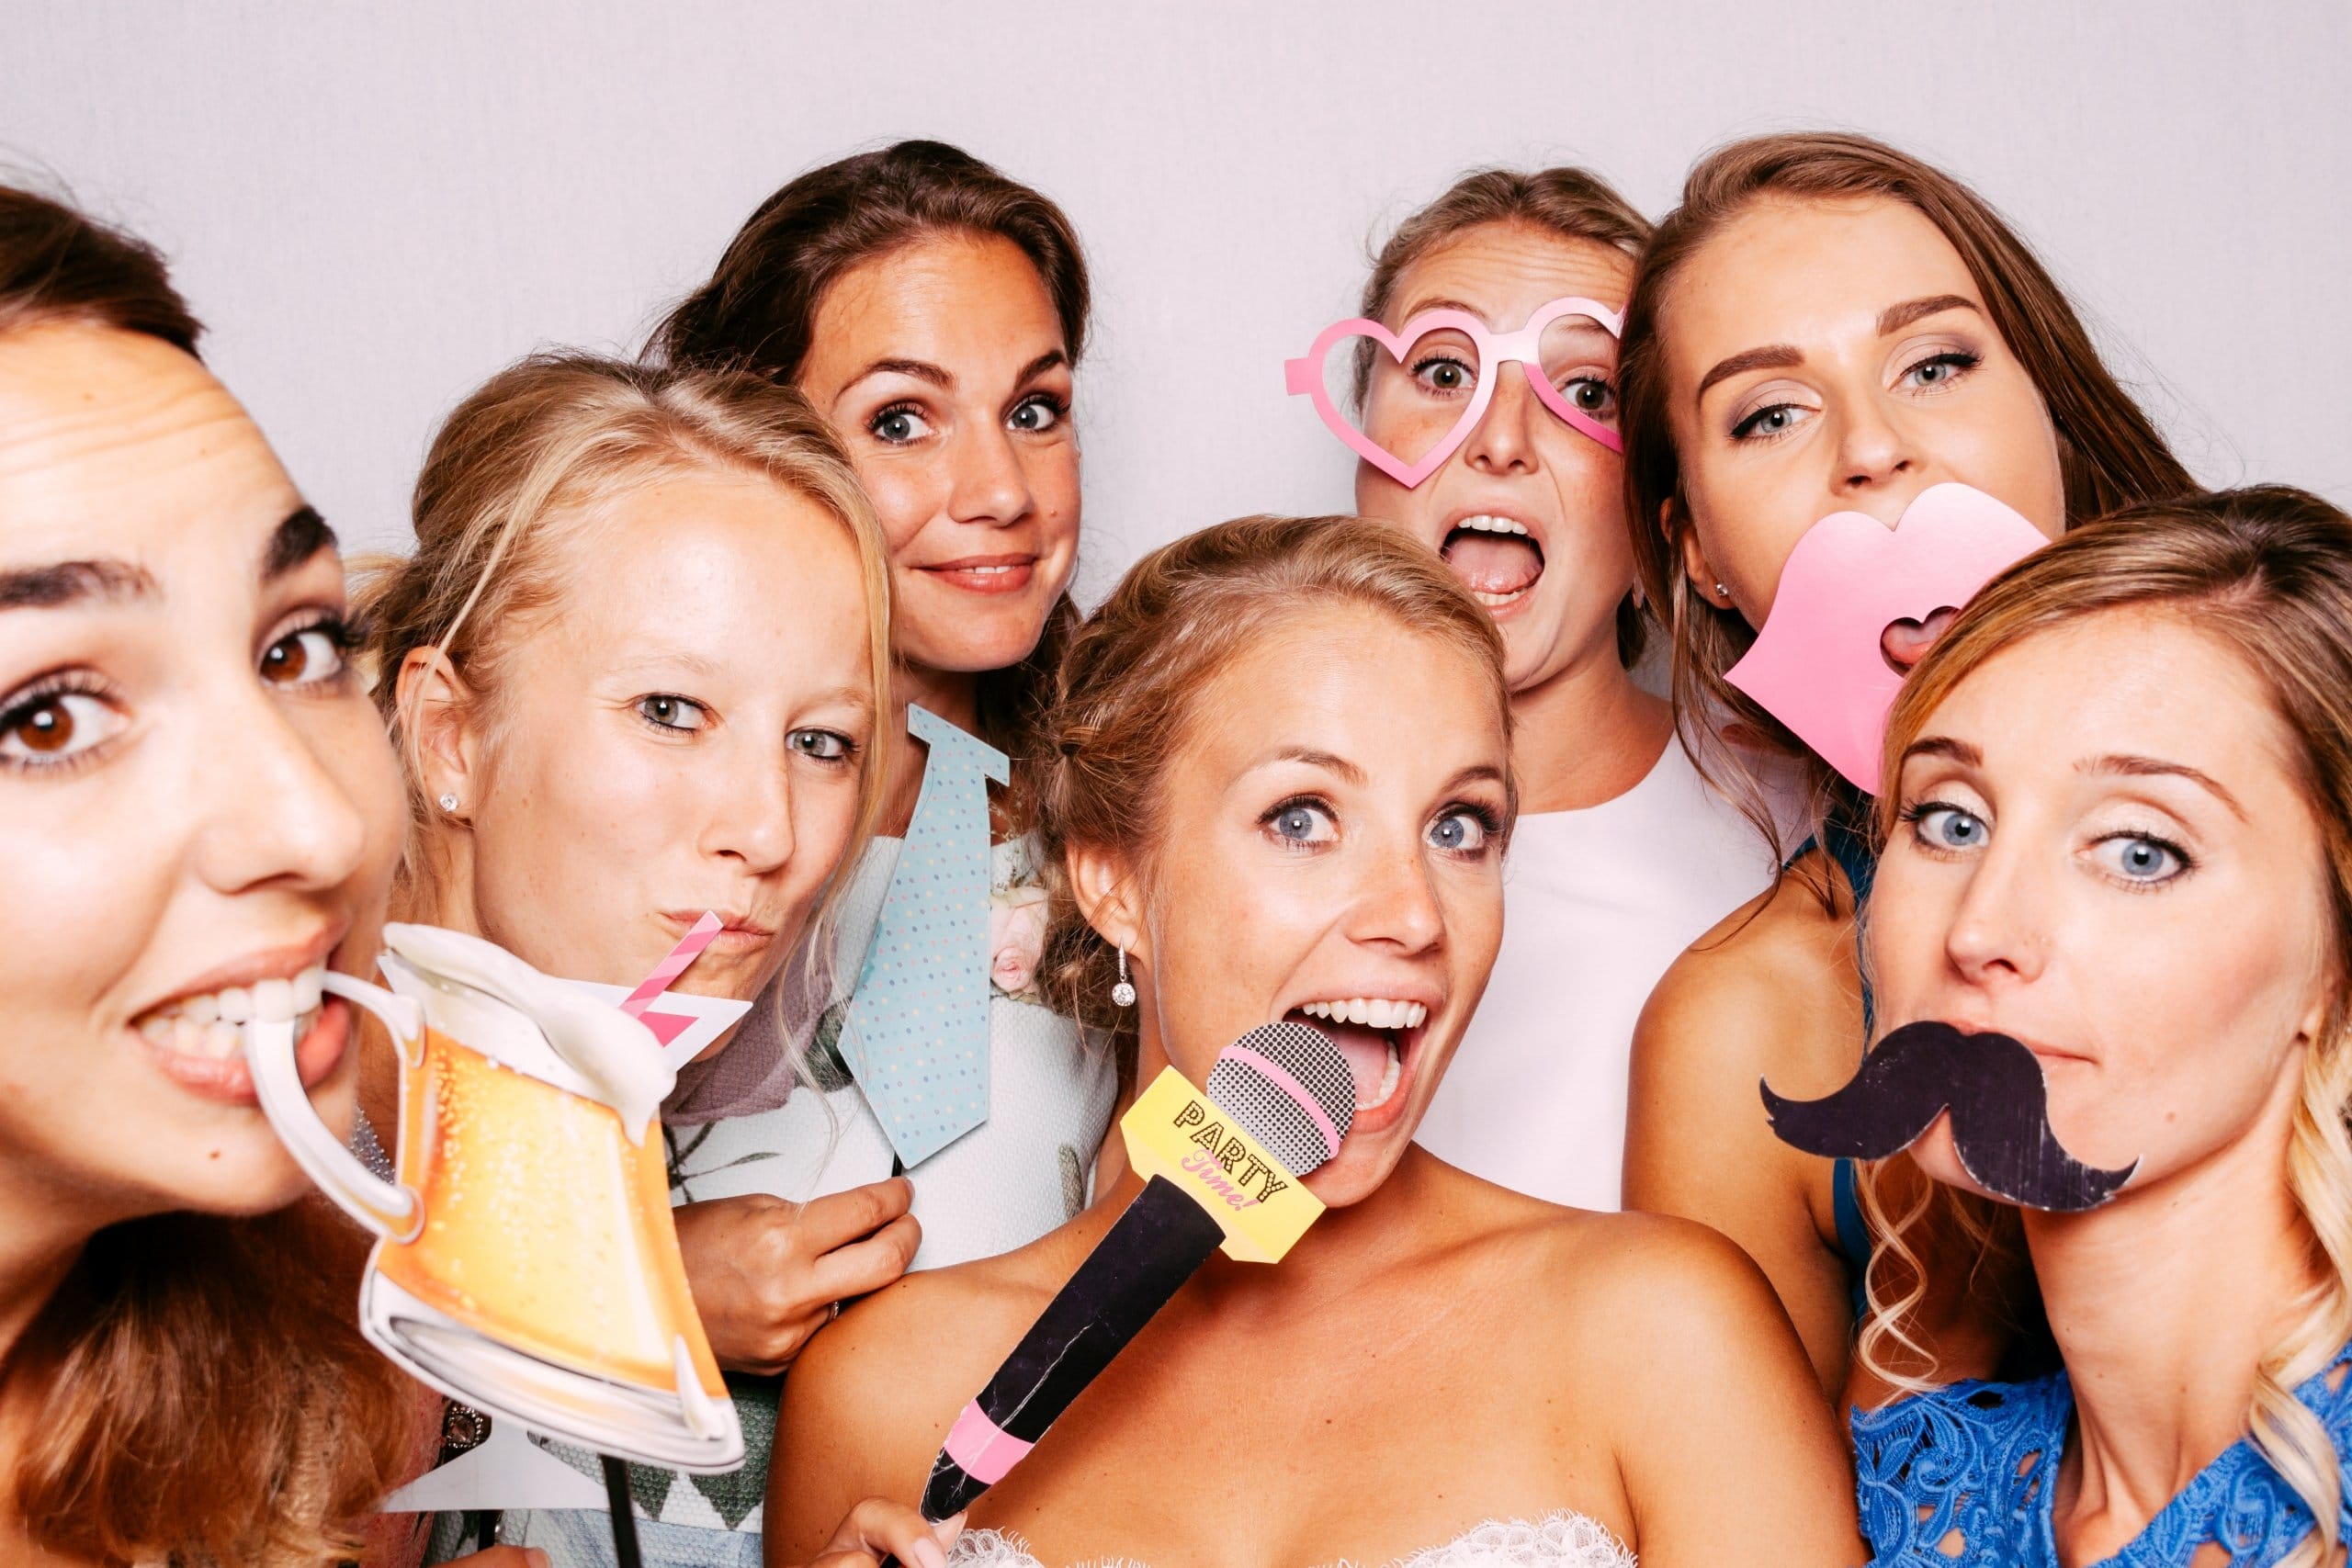 A group of bridesmaids pose in a photobooth during a wedding.